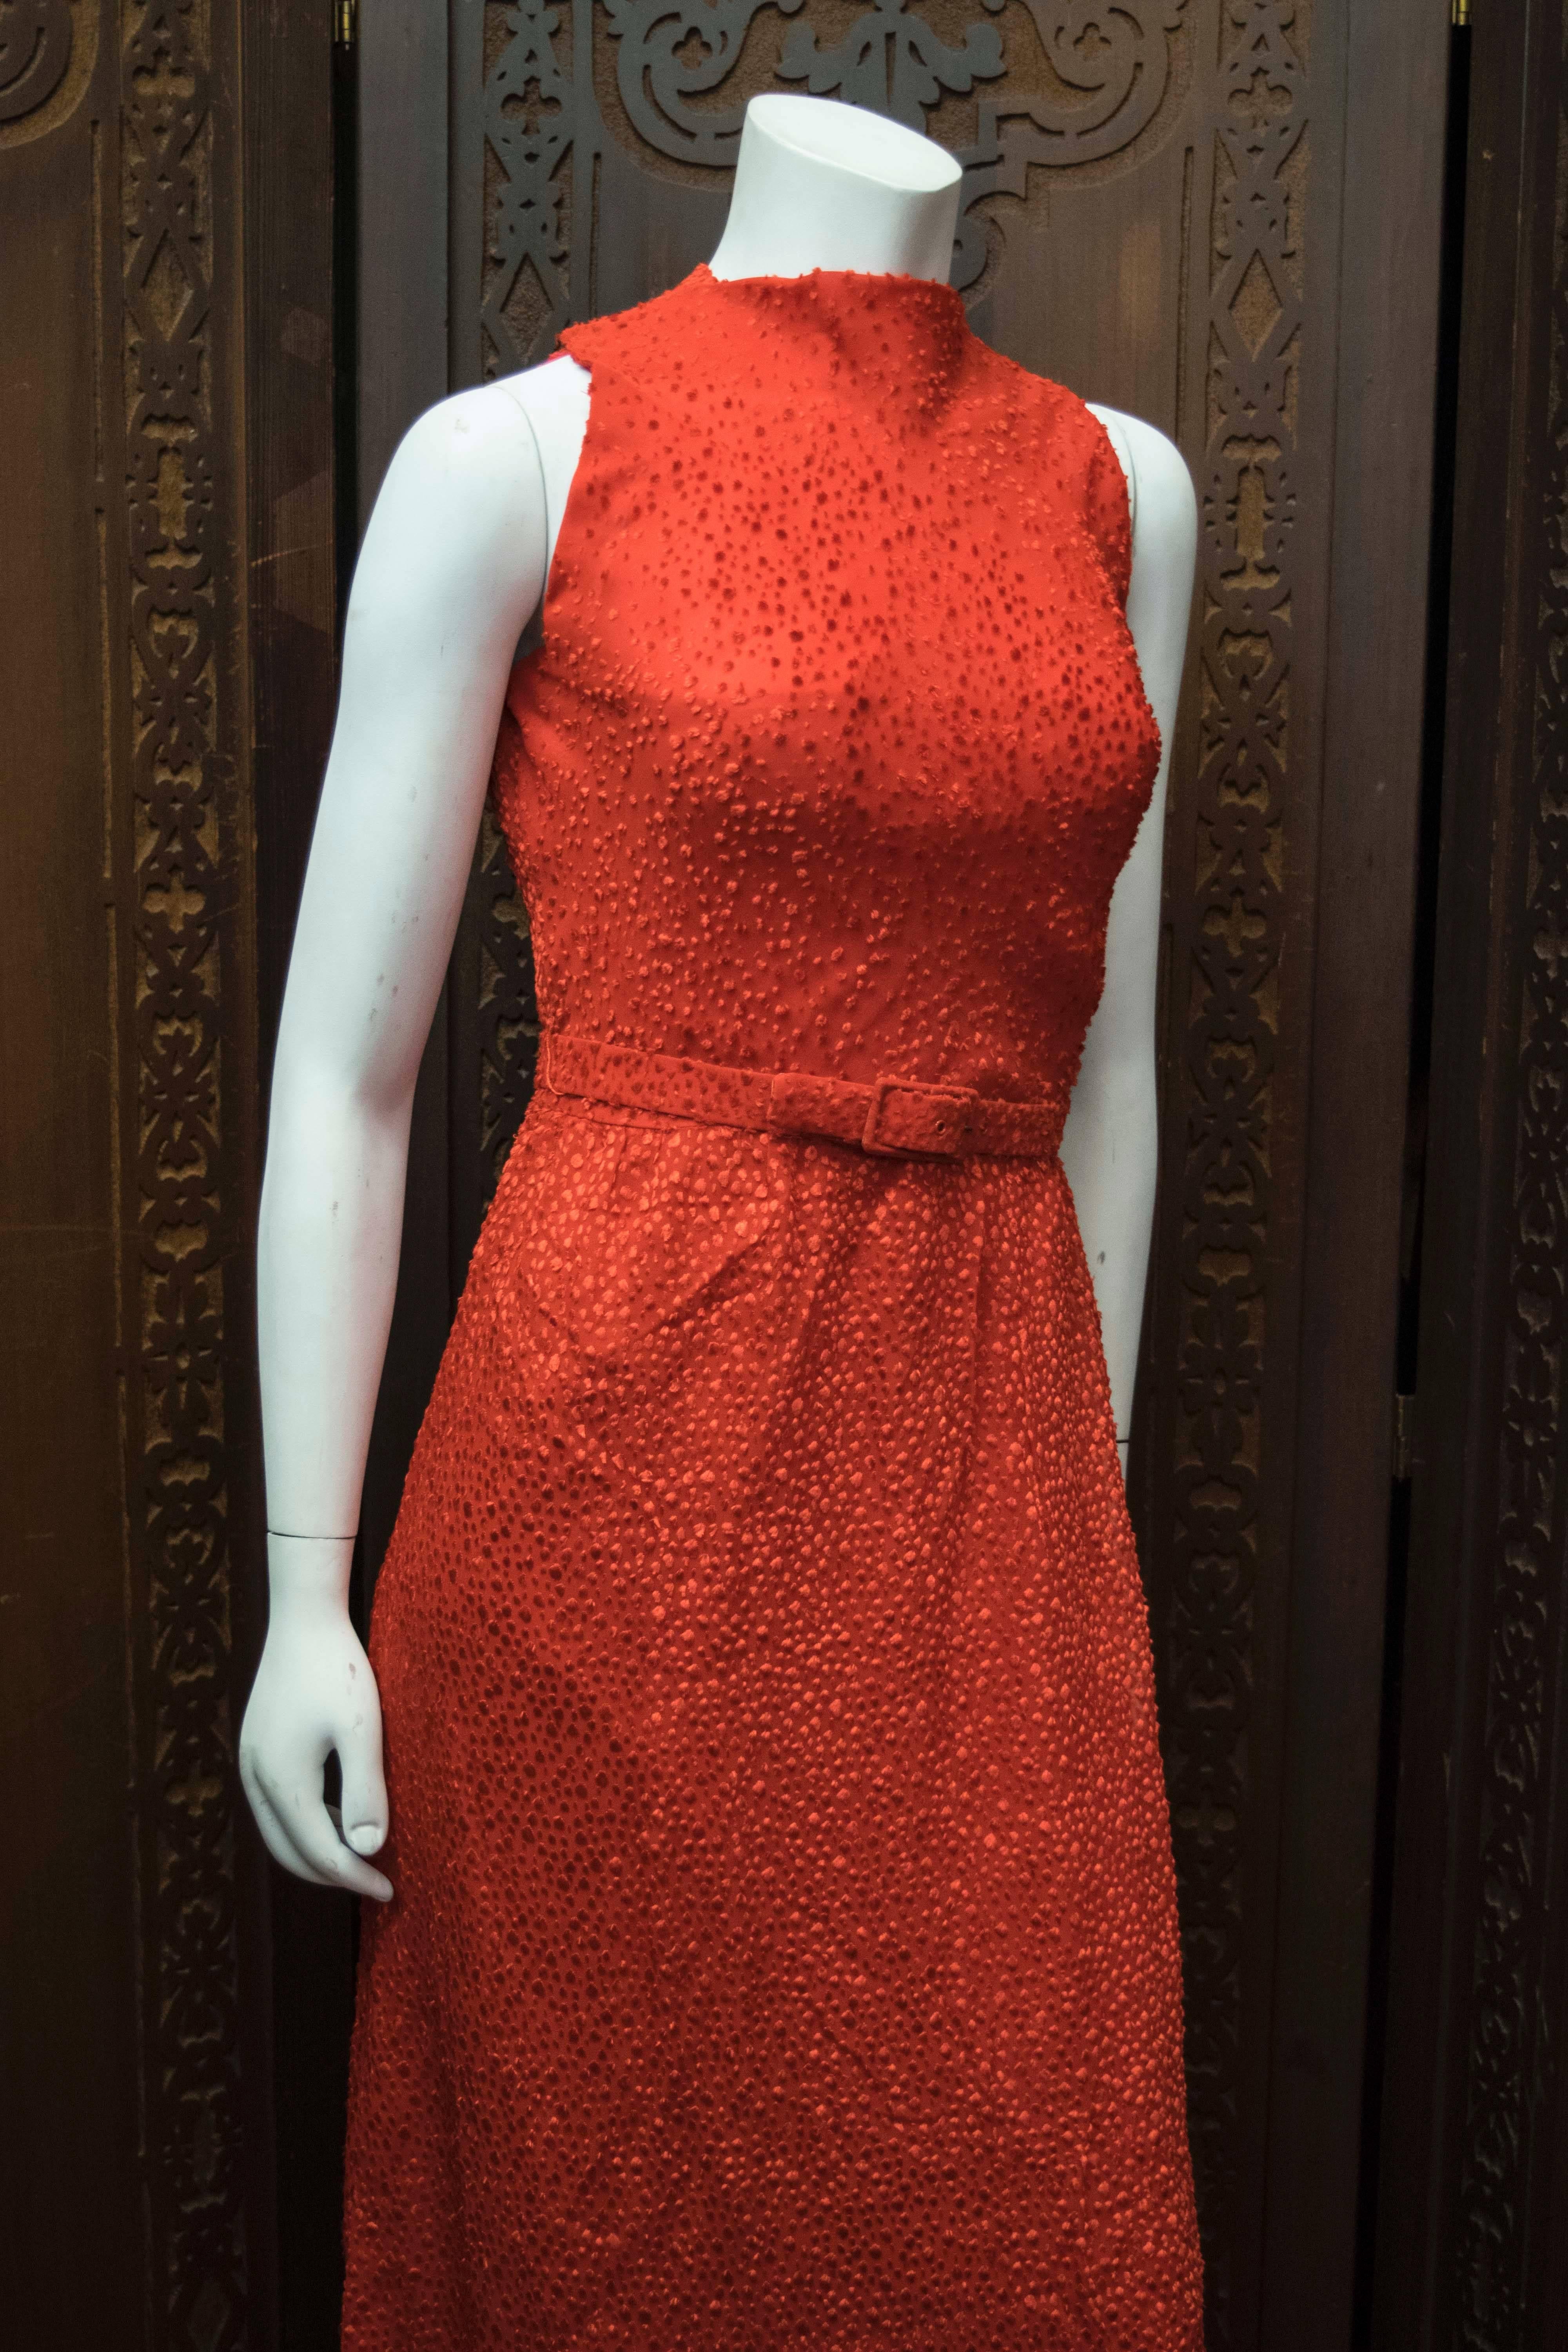 Red Givenchy Belted Dress

Givenchy Boutique for Bergdorf-Goodman long belted dress

B 36
W 28
H 40
L 55